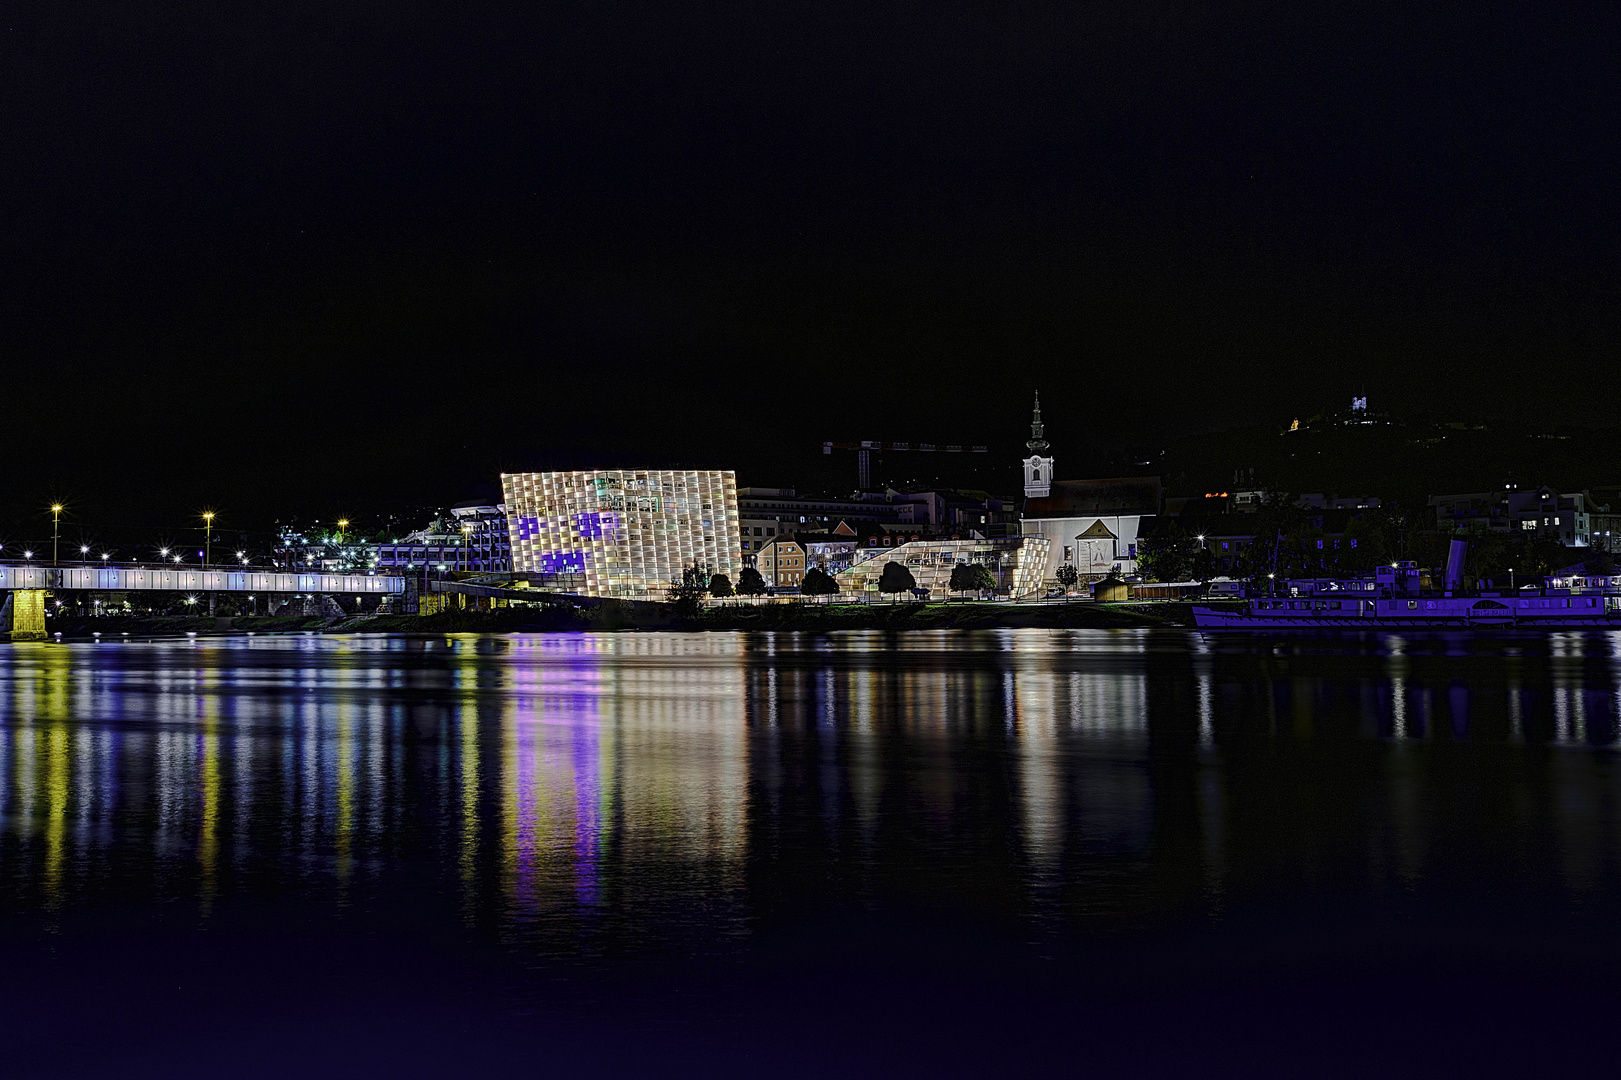 Ars Electronica Center, Linz